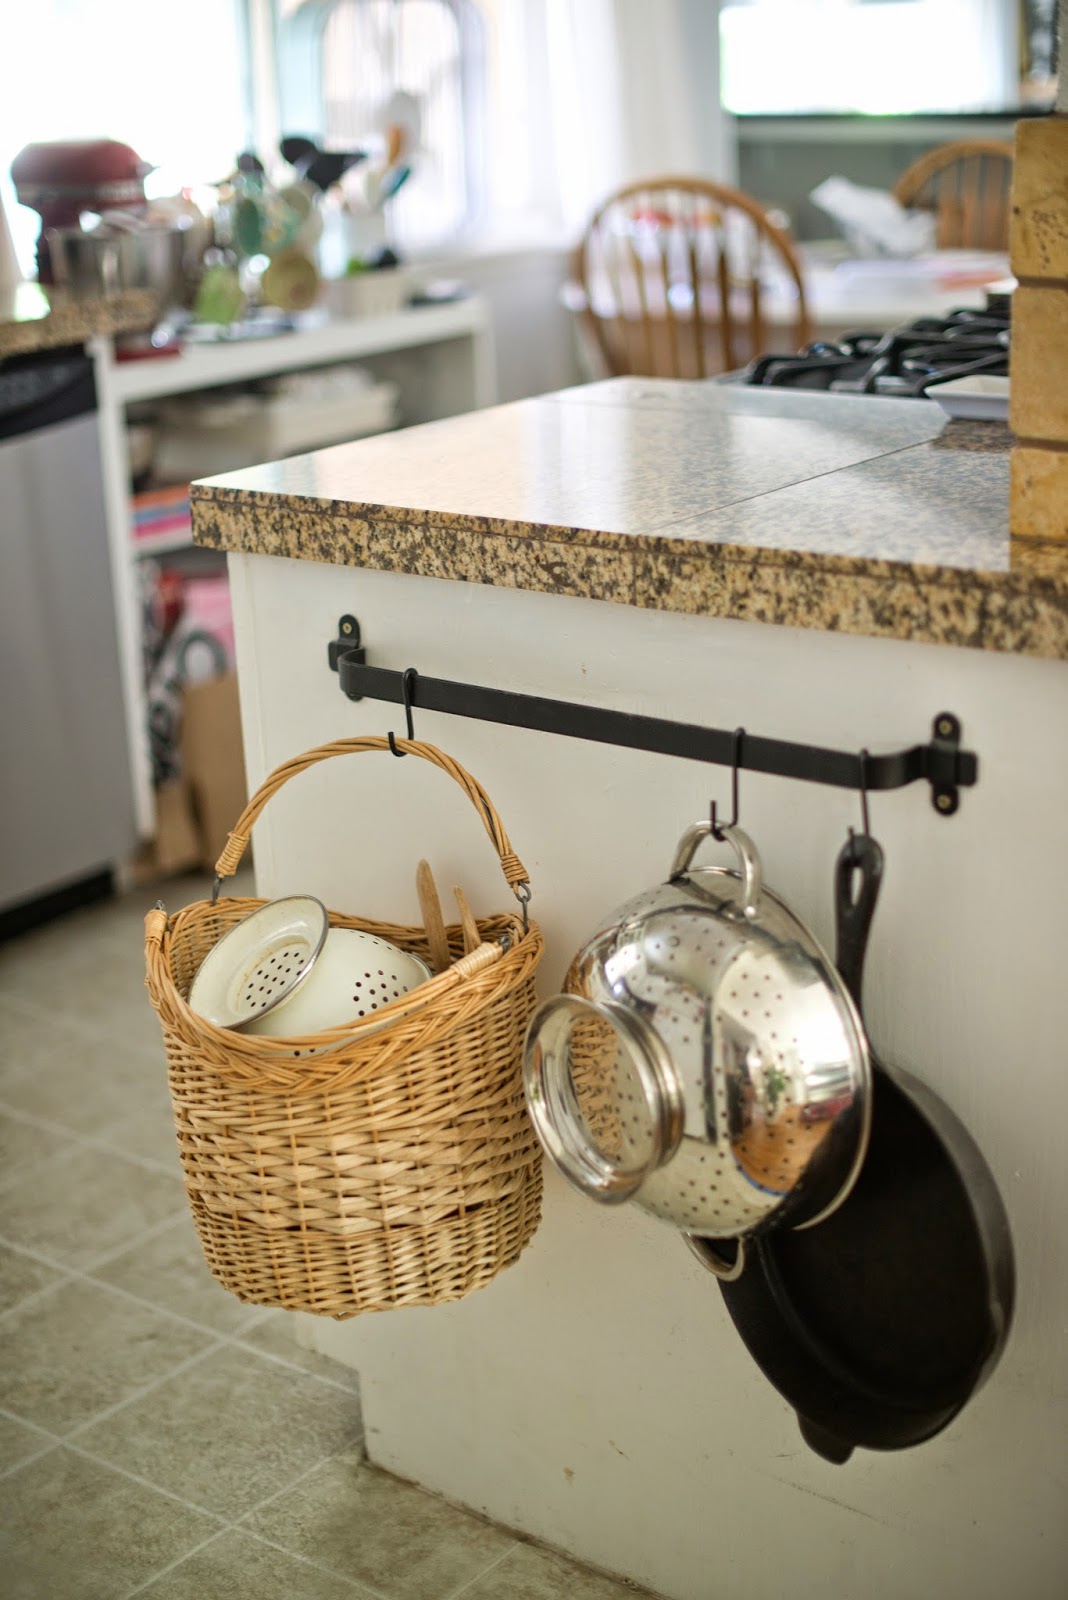 Use a towel bar to hold kitchen supplies. A cute way to organize the kitchen.